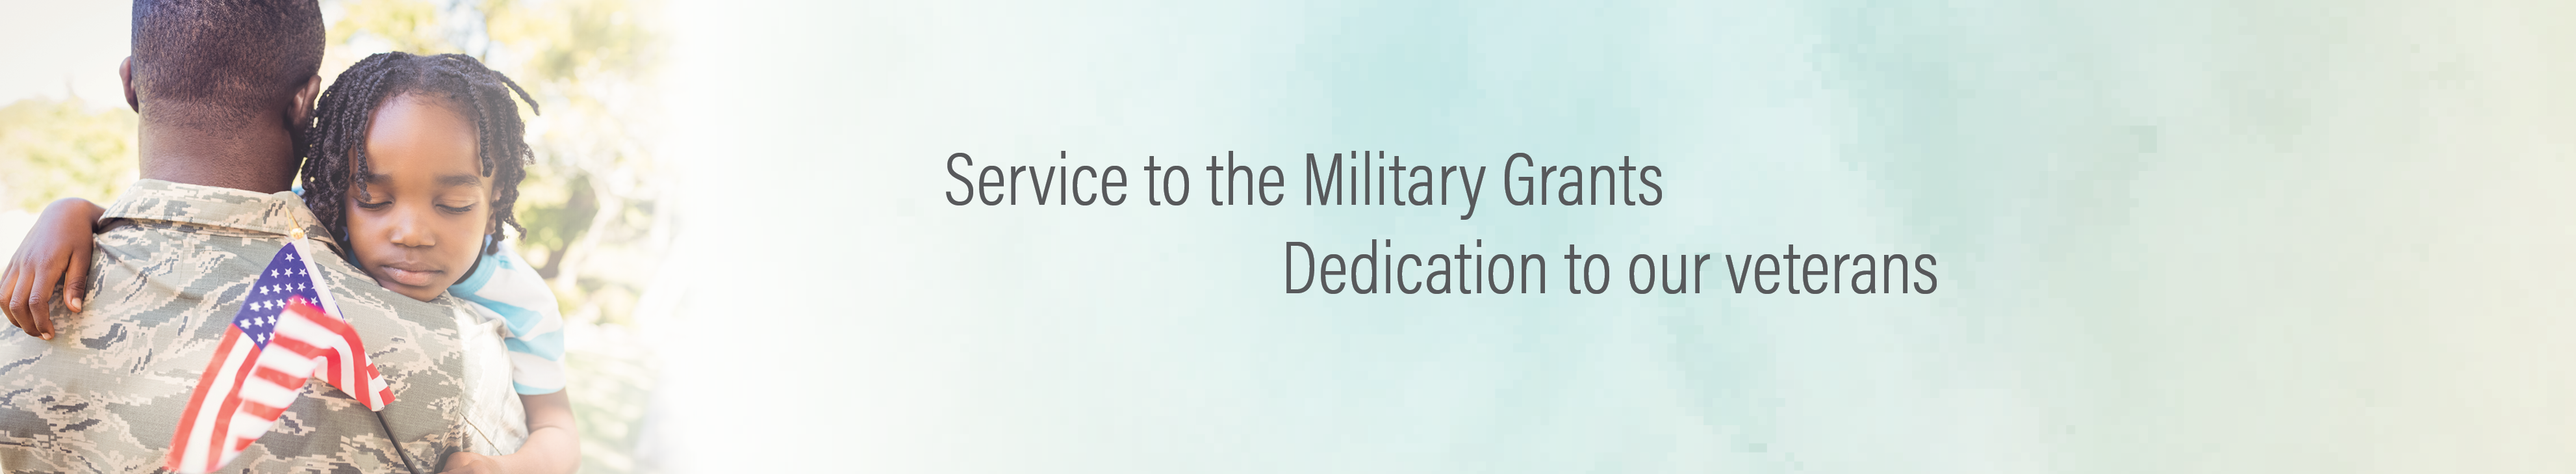 Healing Touch Professional Association - Service to the Military